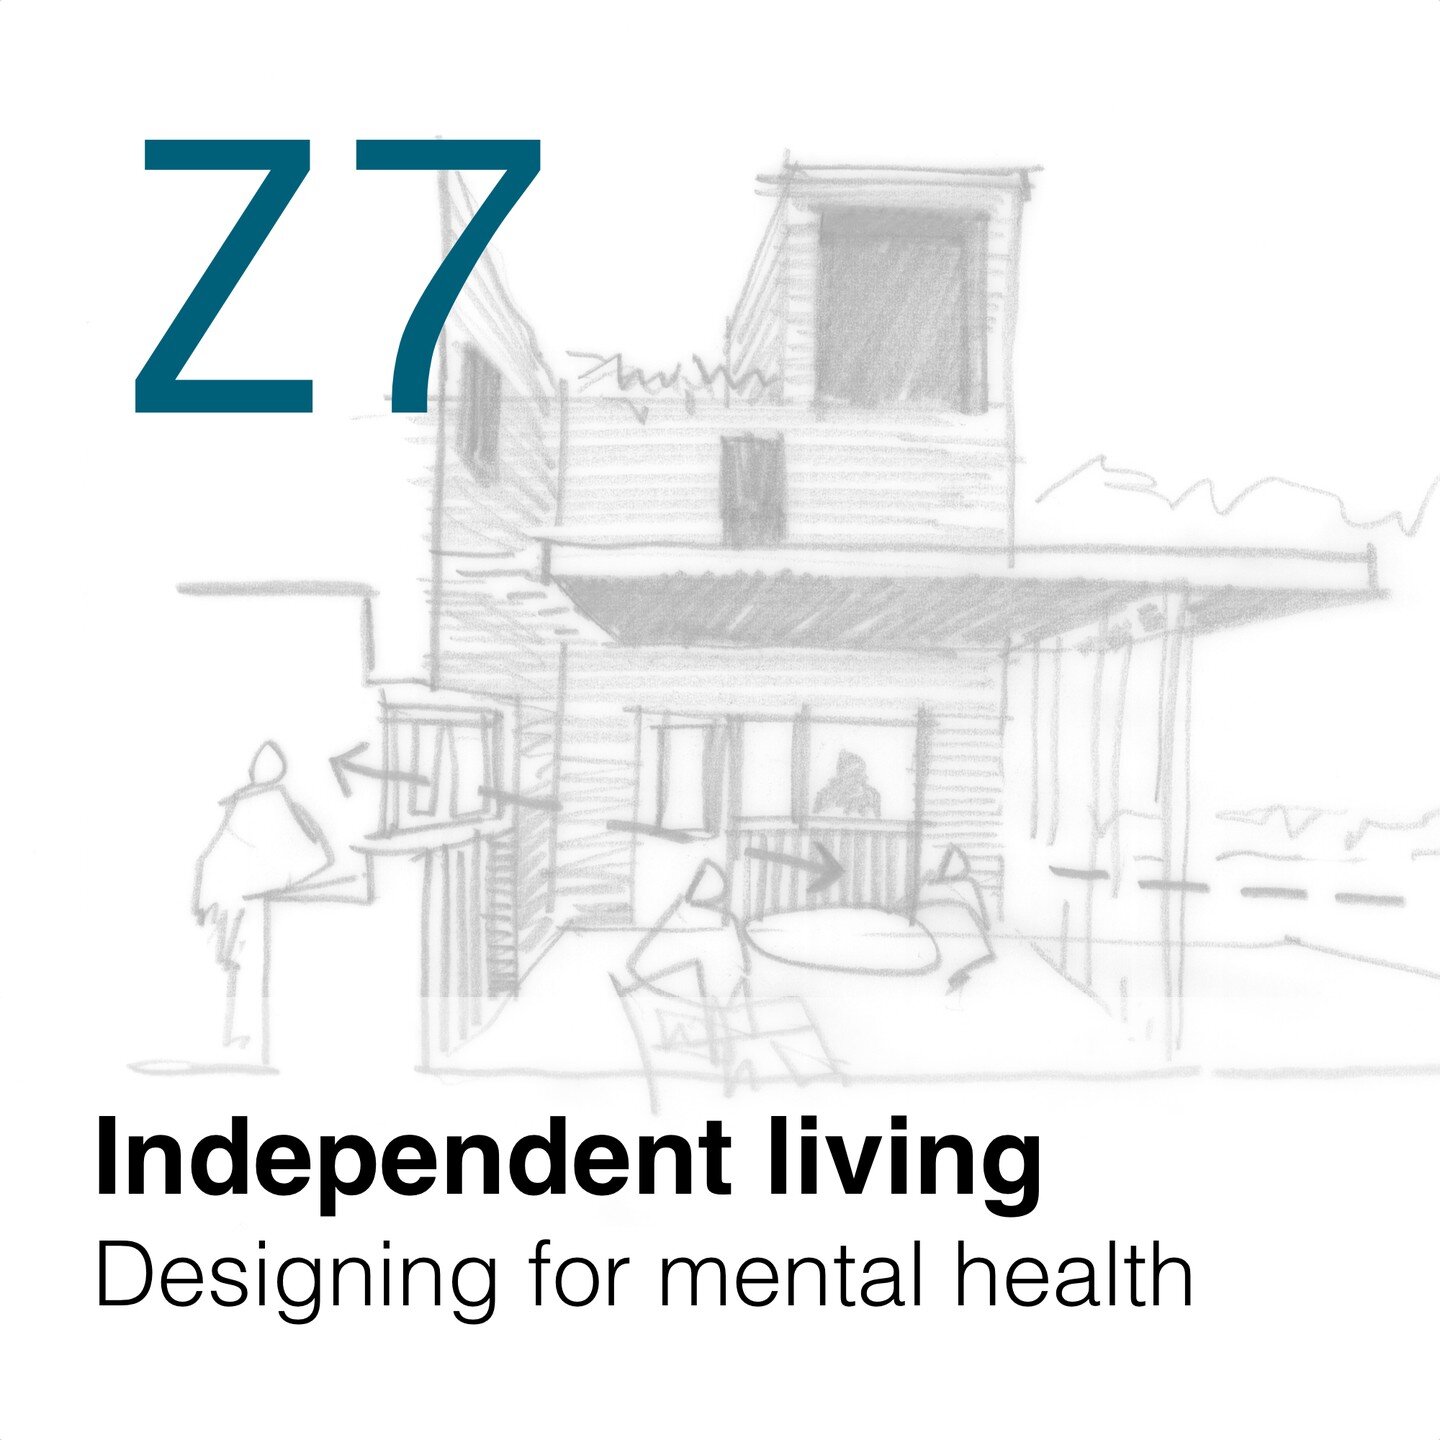 zine 7: Independent living - designing for mental health

A careful tapestry of courtyard spaces form the basis of an unbuilt proposal for a collective housing scheme for Together, a charity working to support mental wellbeing. Each courtyard allows 